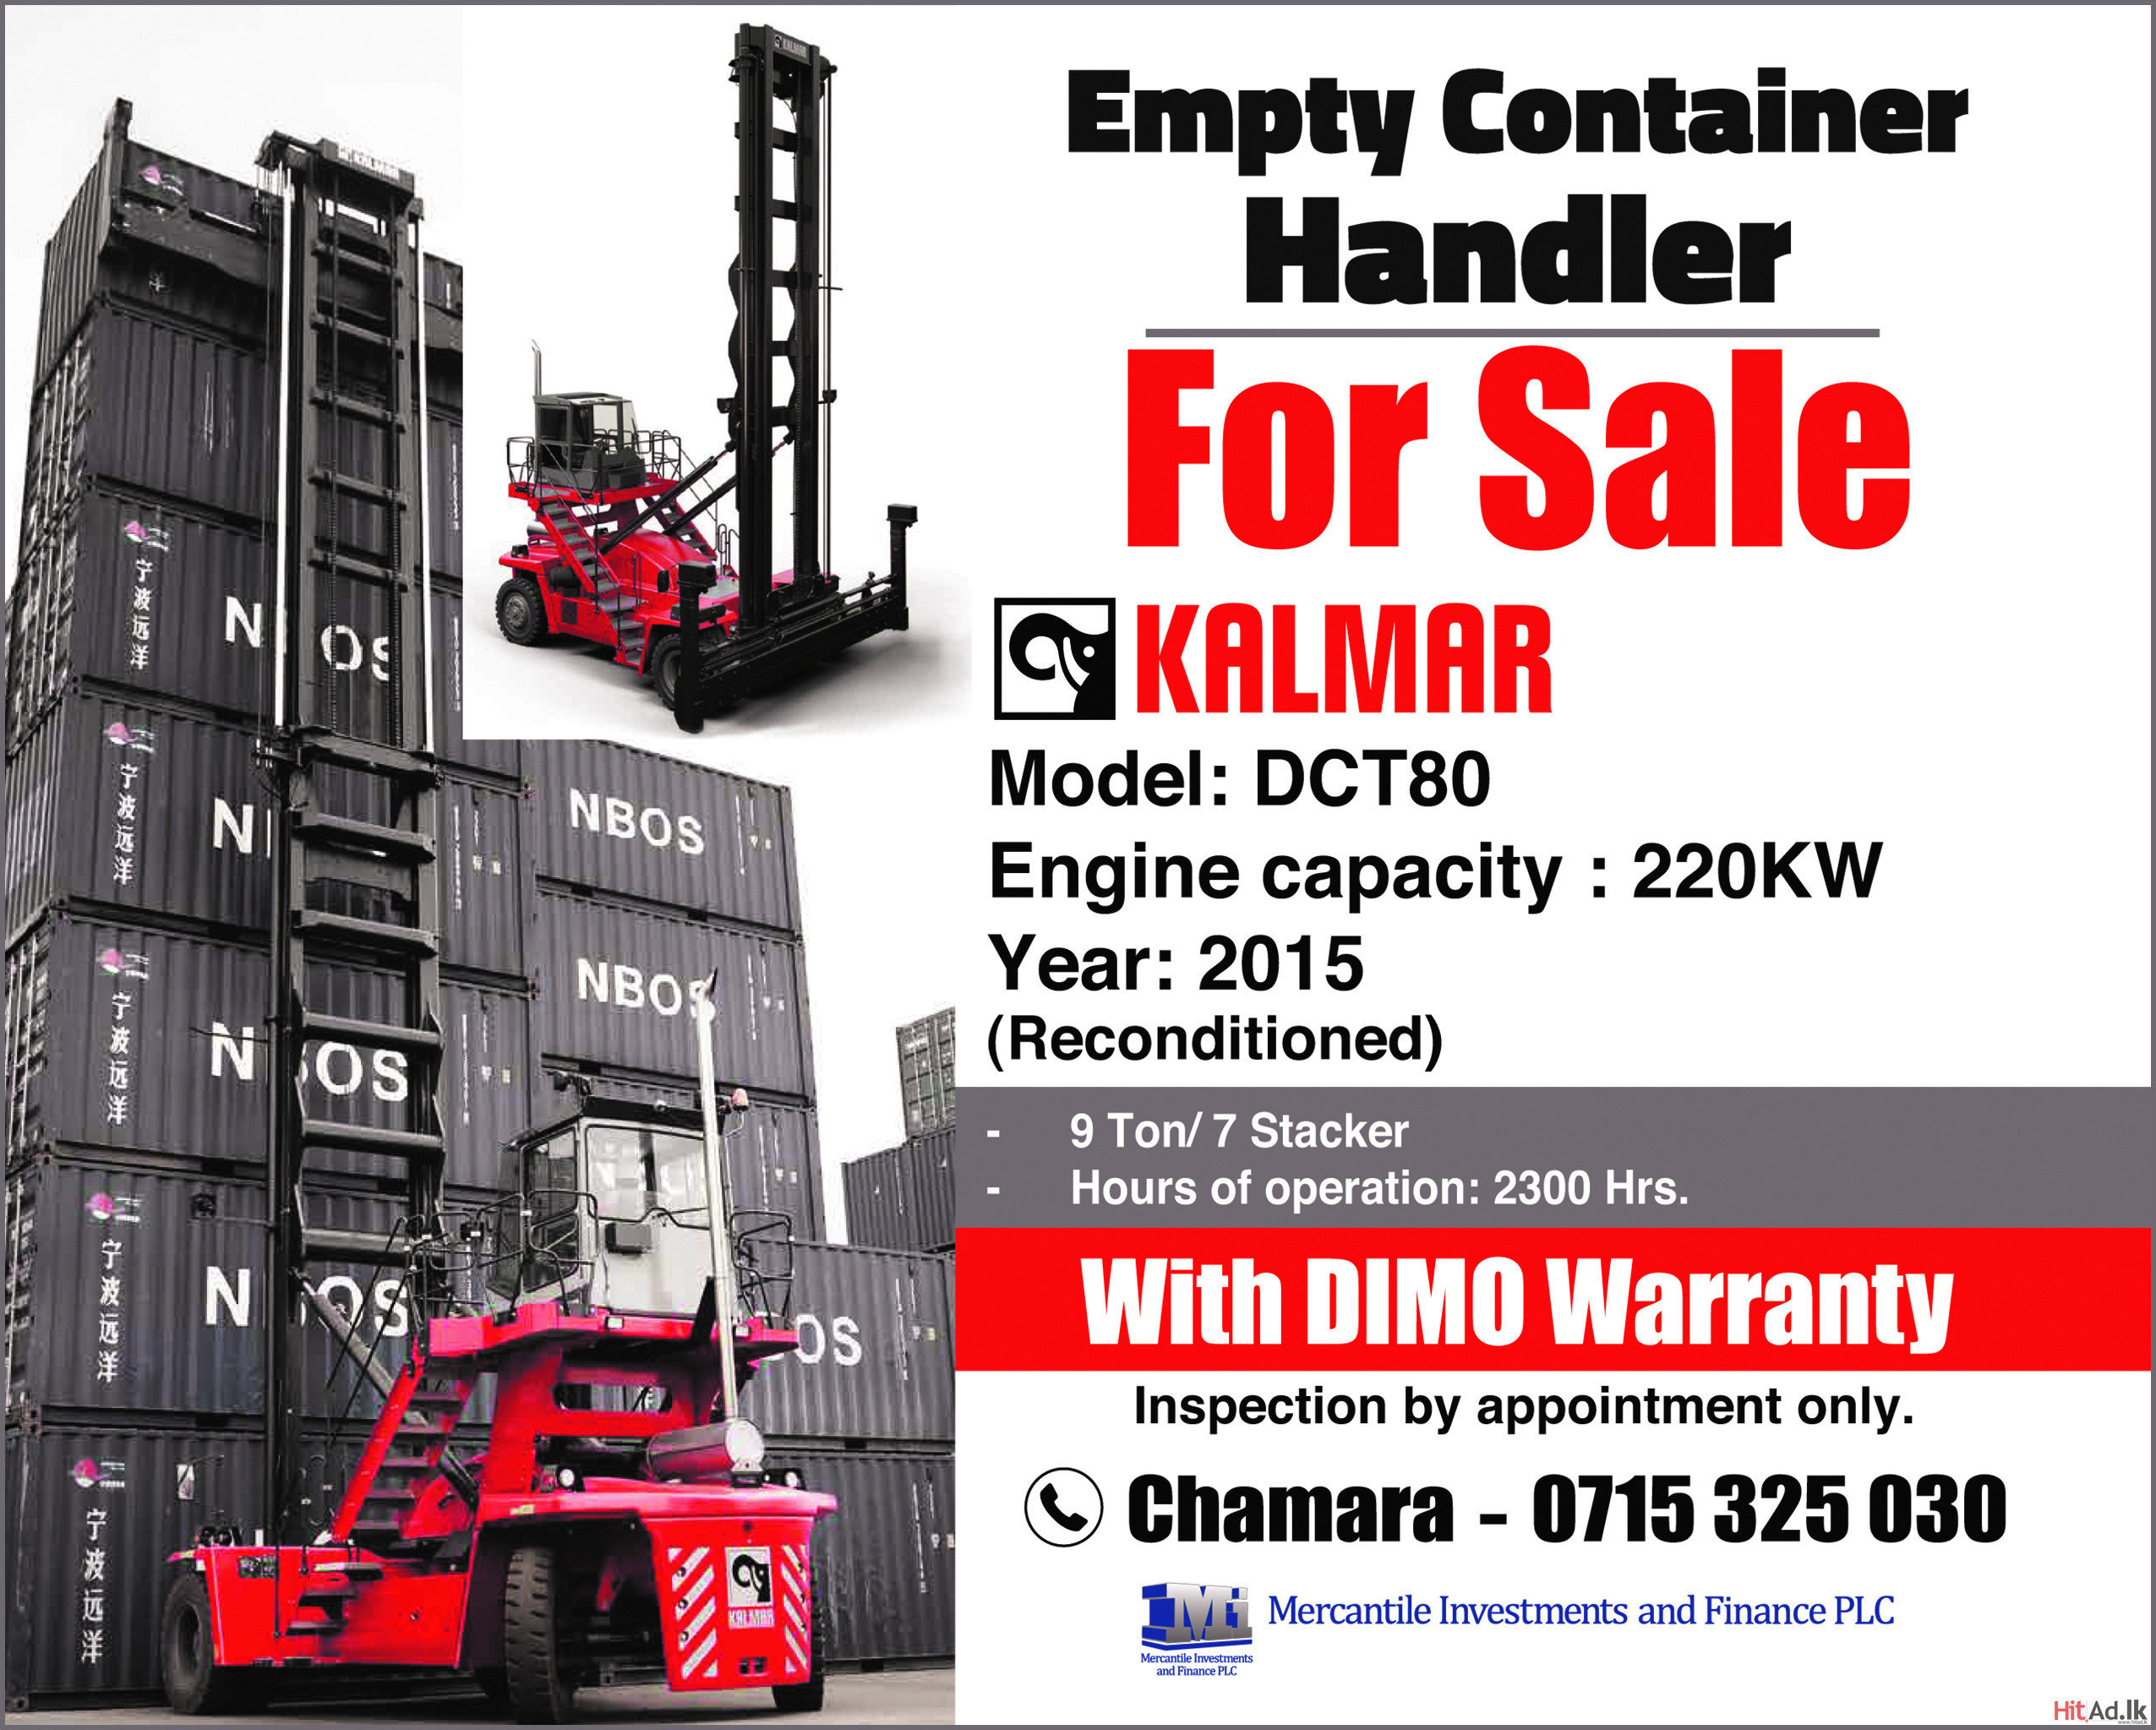 Empty Container Handler for Sale 